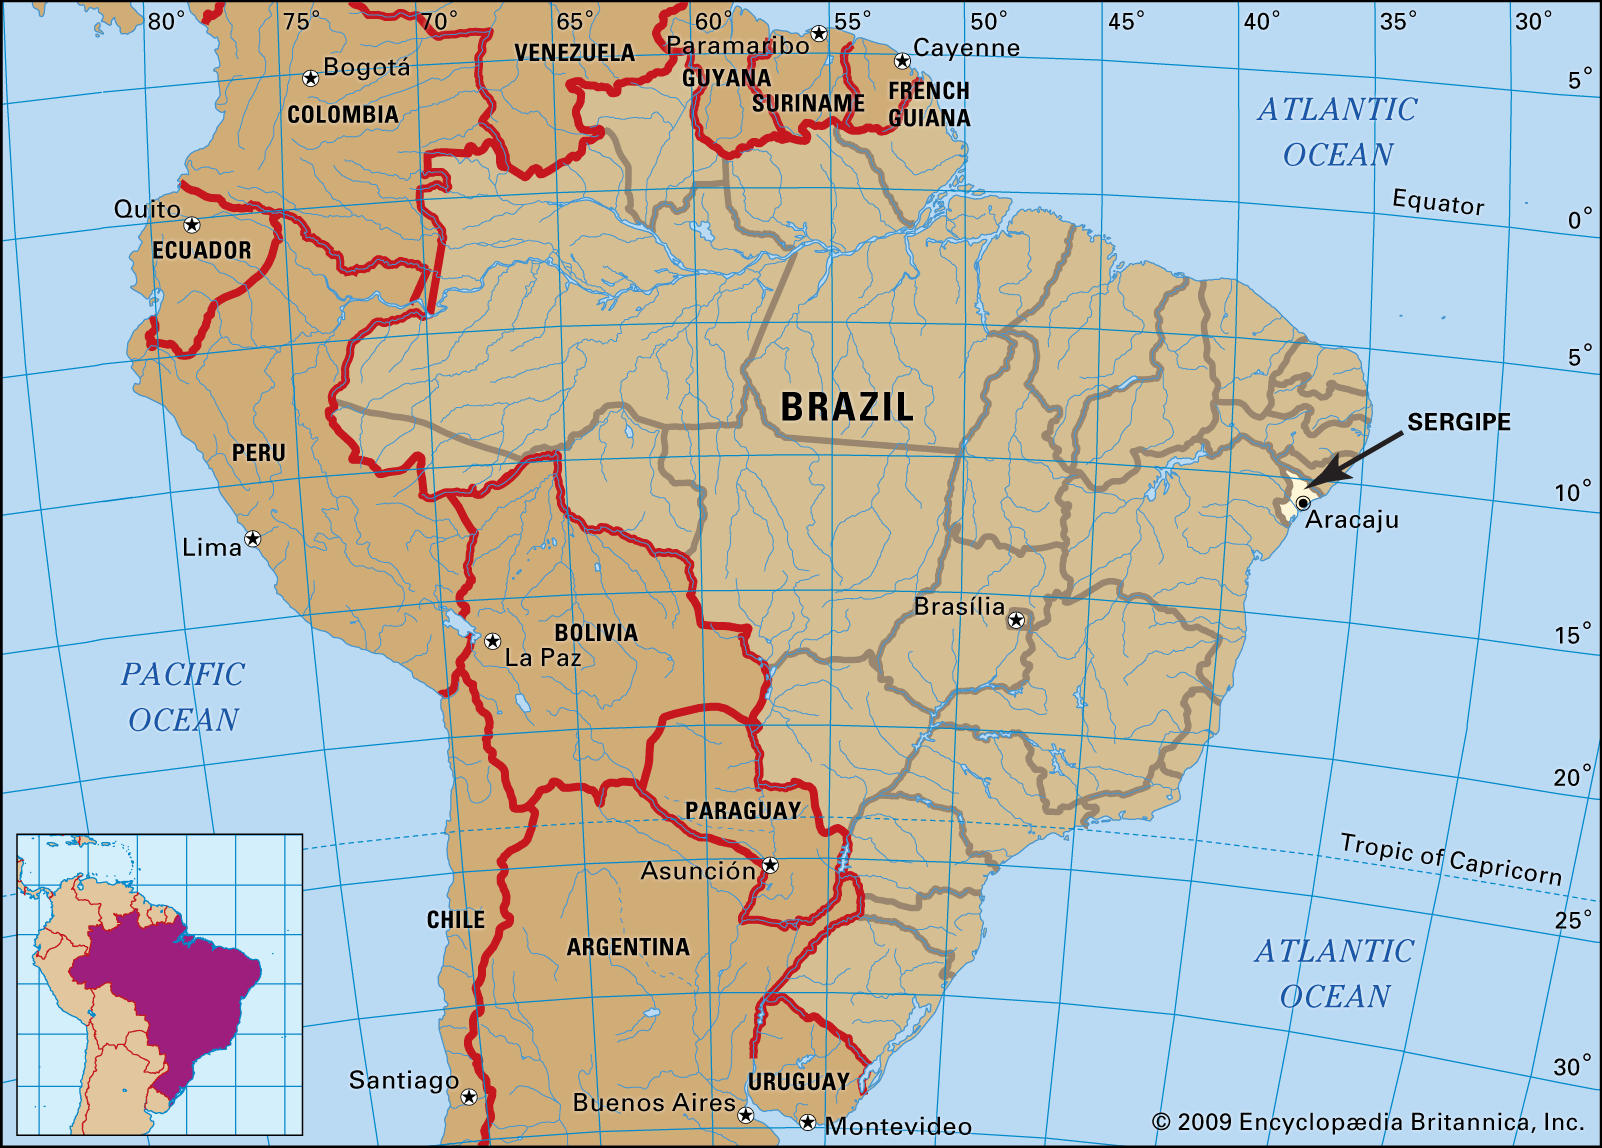 Sergipe is the smallest Brazilian state and the second-smallest Brazilian federative unit after the Federal District.